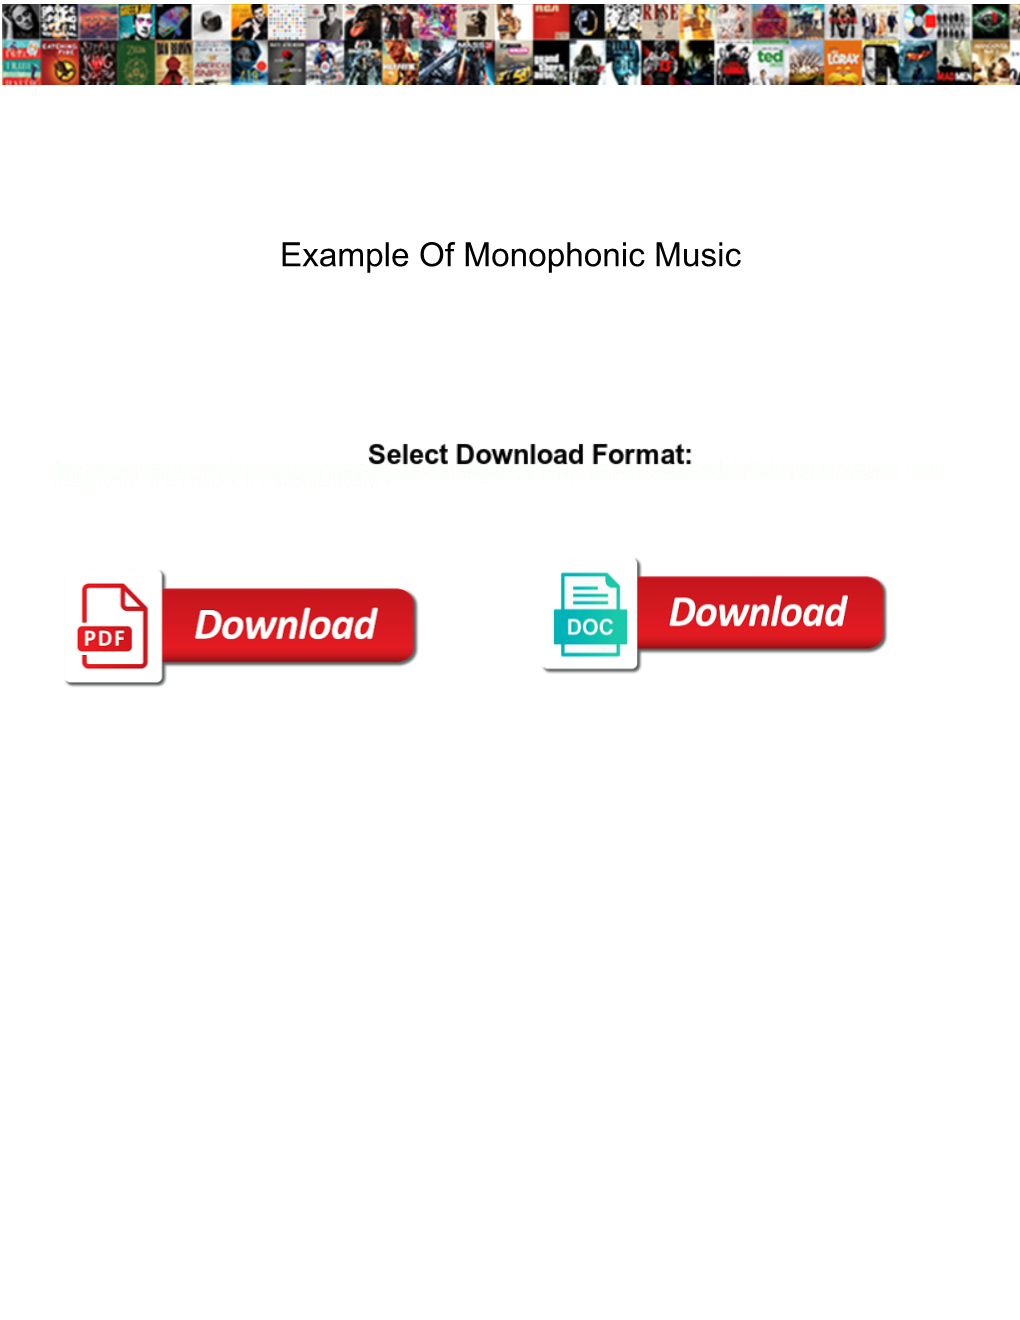 Example of Monophonic Music